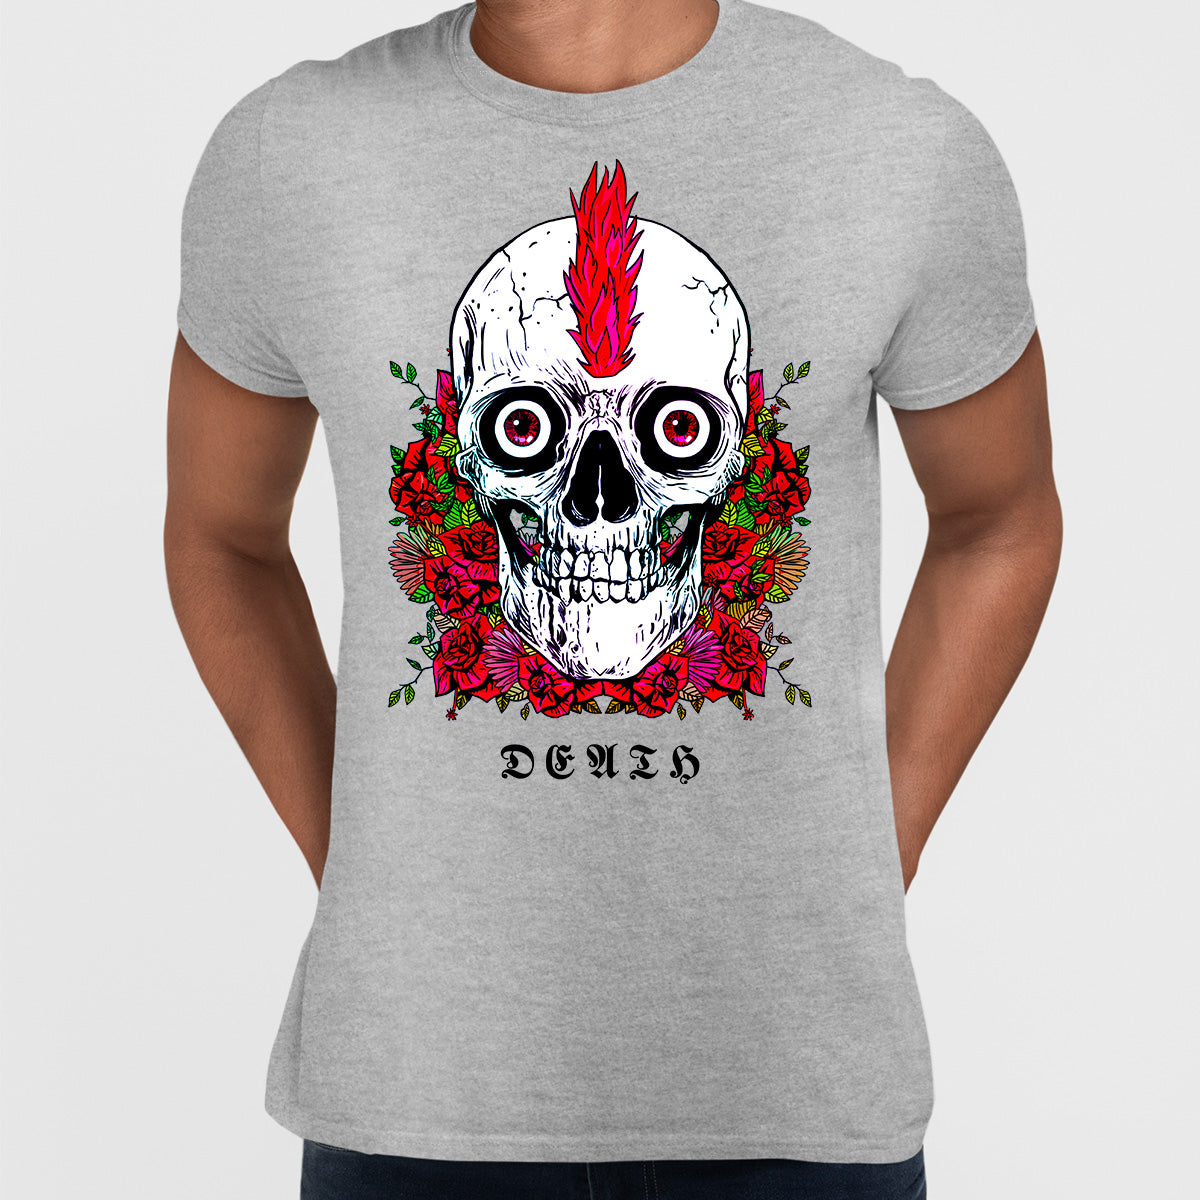 Punk Skull With Roses and Red Hair T-shirts with an Attitude For Men Crew Neck - Kuzi Tees